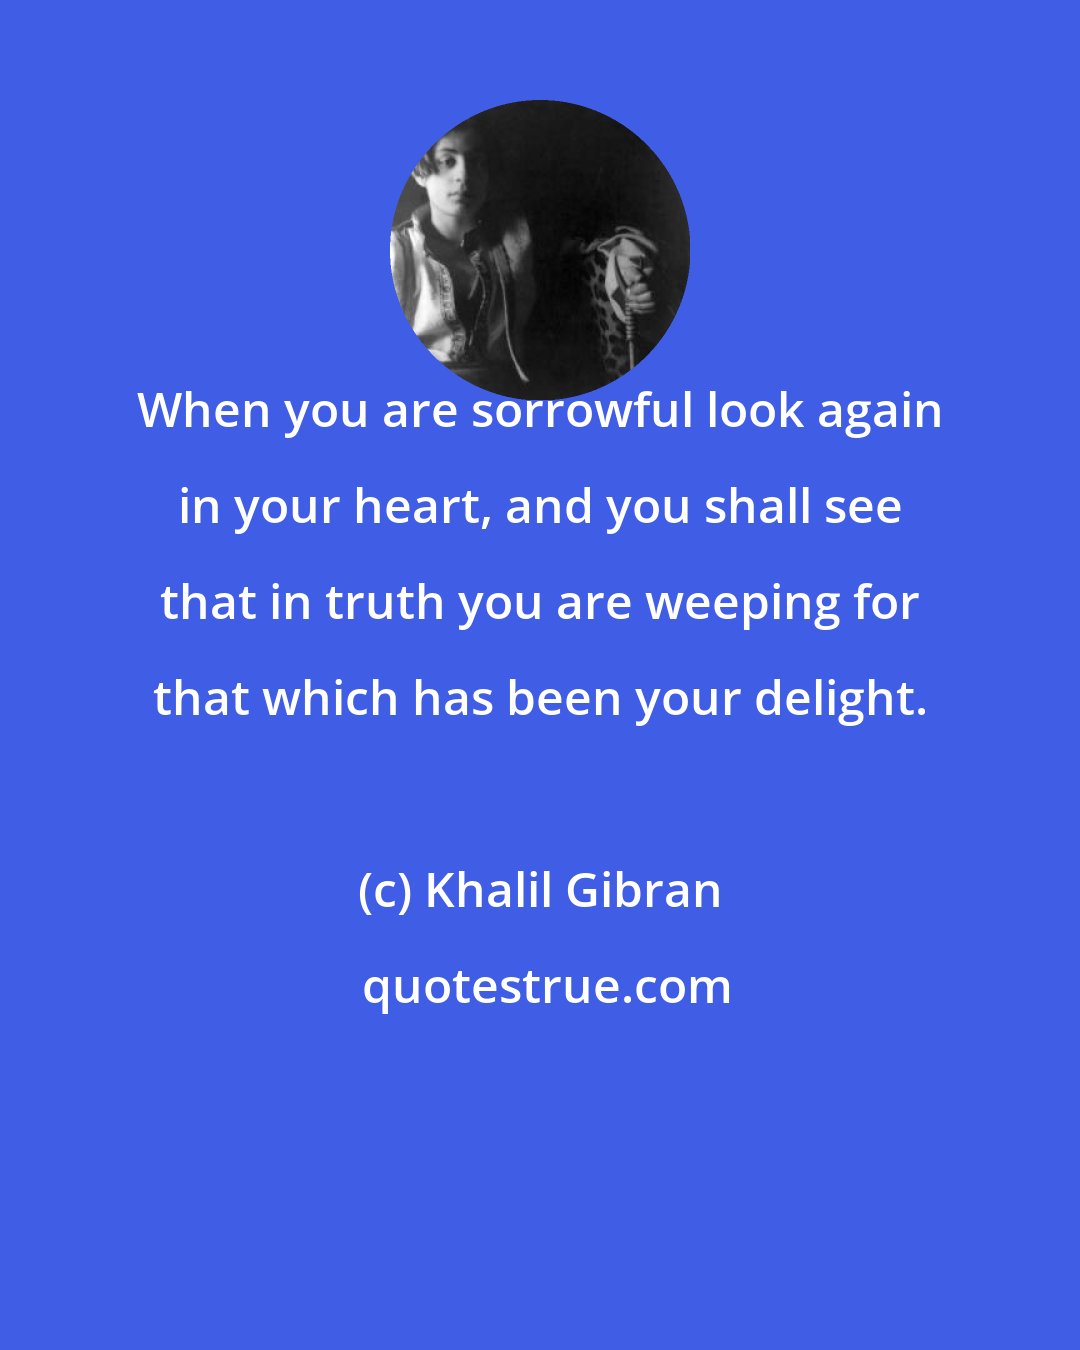 Khalil Gibran: When you are sorrowful look again in your heart, and you shall see that in truth you are weeping for that which has been your delight.